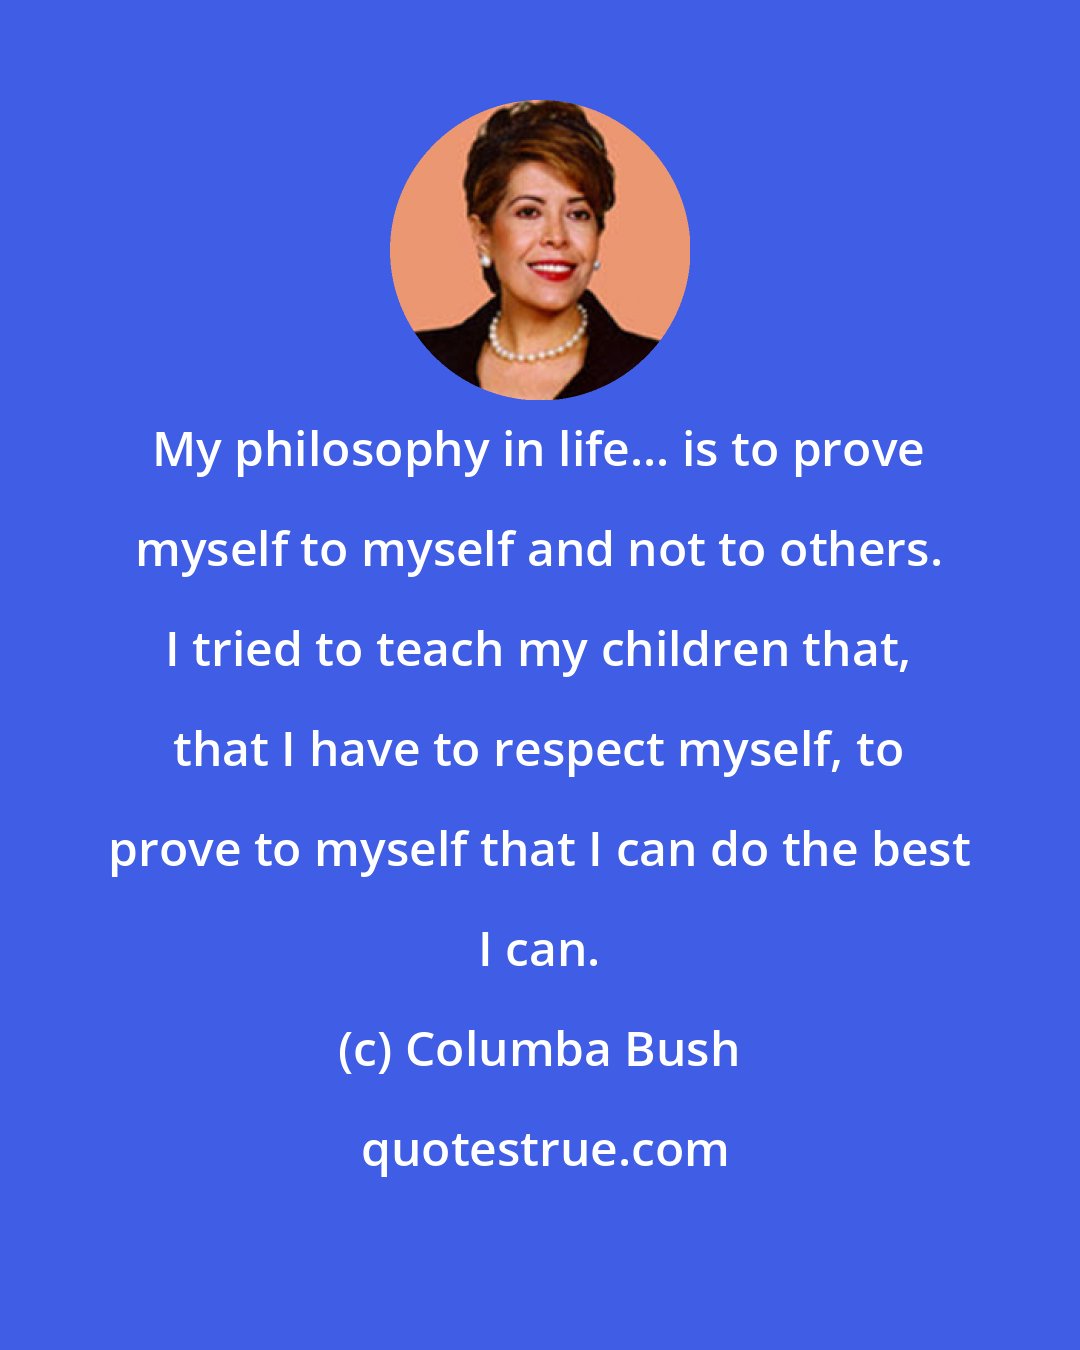 Columba Bush: My philosophy in life... is to prove myself to myself and not to others. I tried to teach my children that, that I have to respect myself, to prove to myself that I can do the best I can.